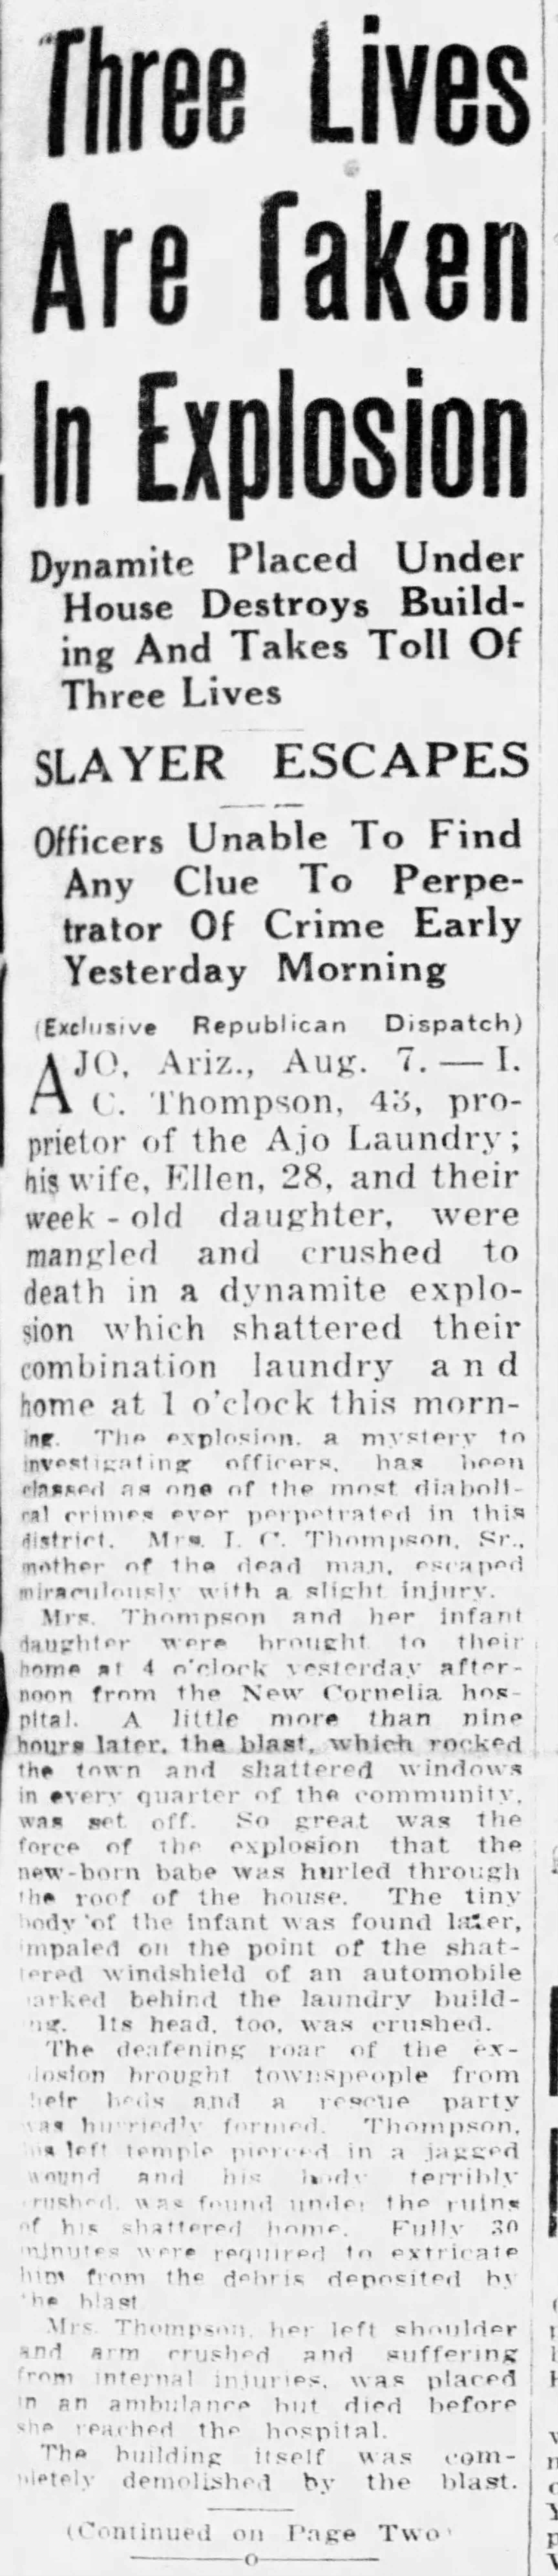 Article on the murder of the Thompson family, part 1